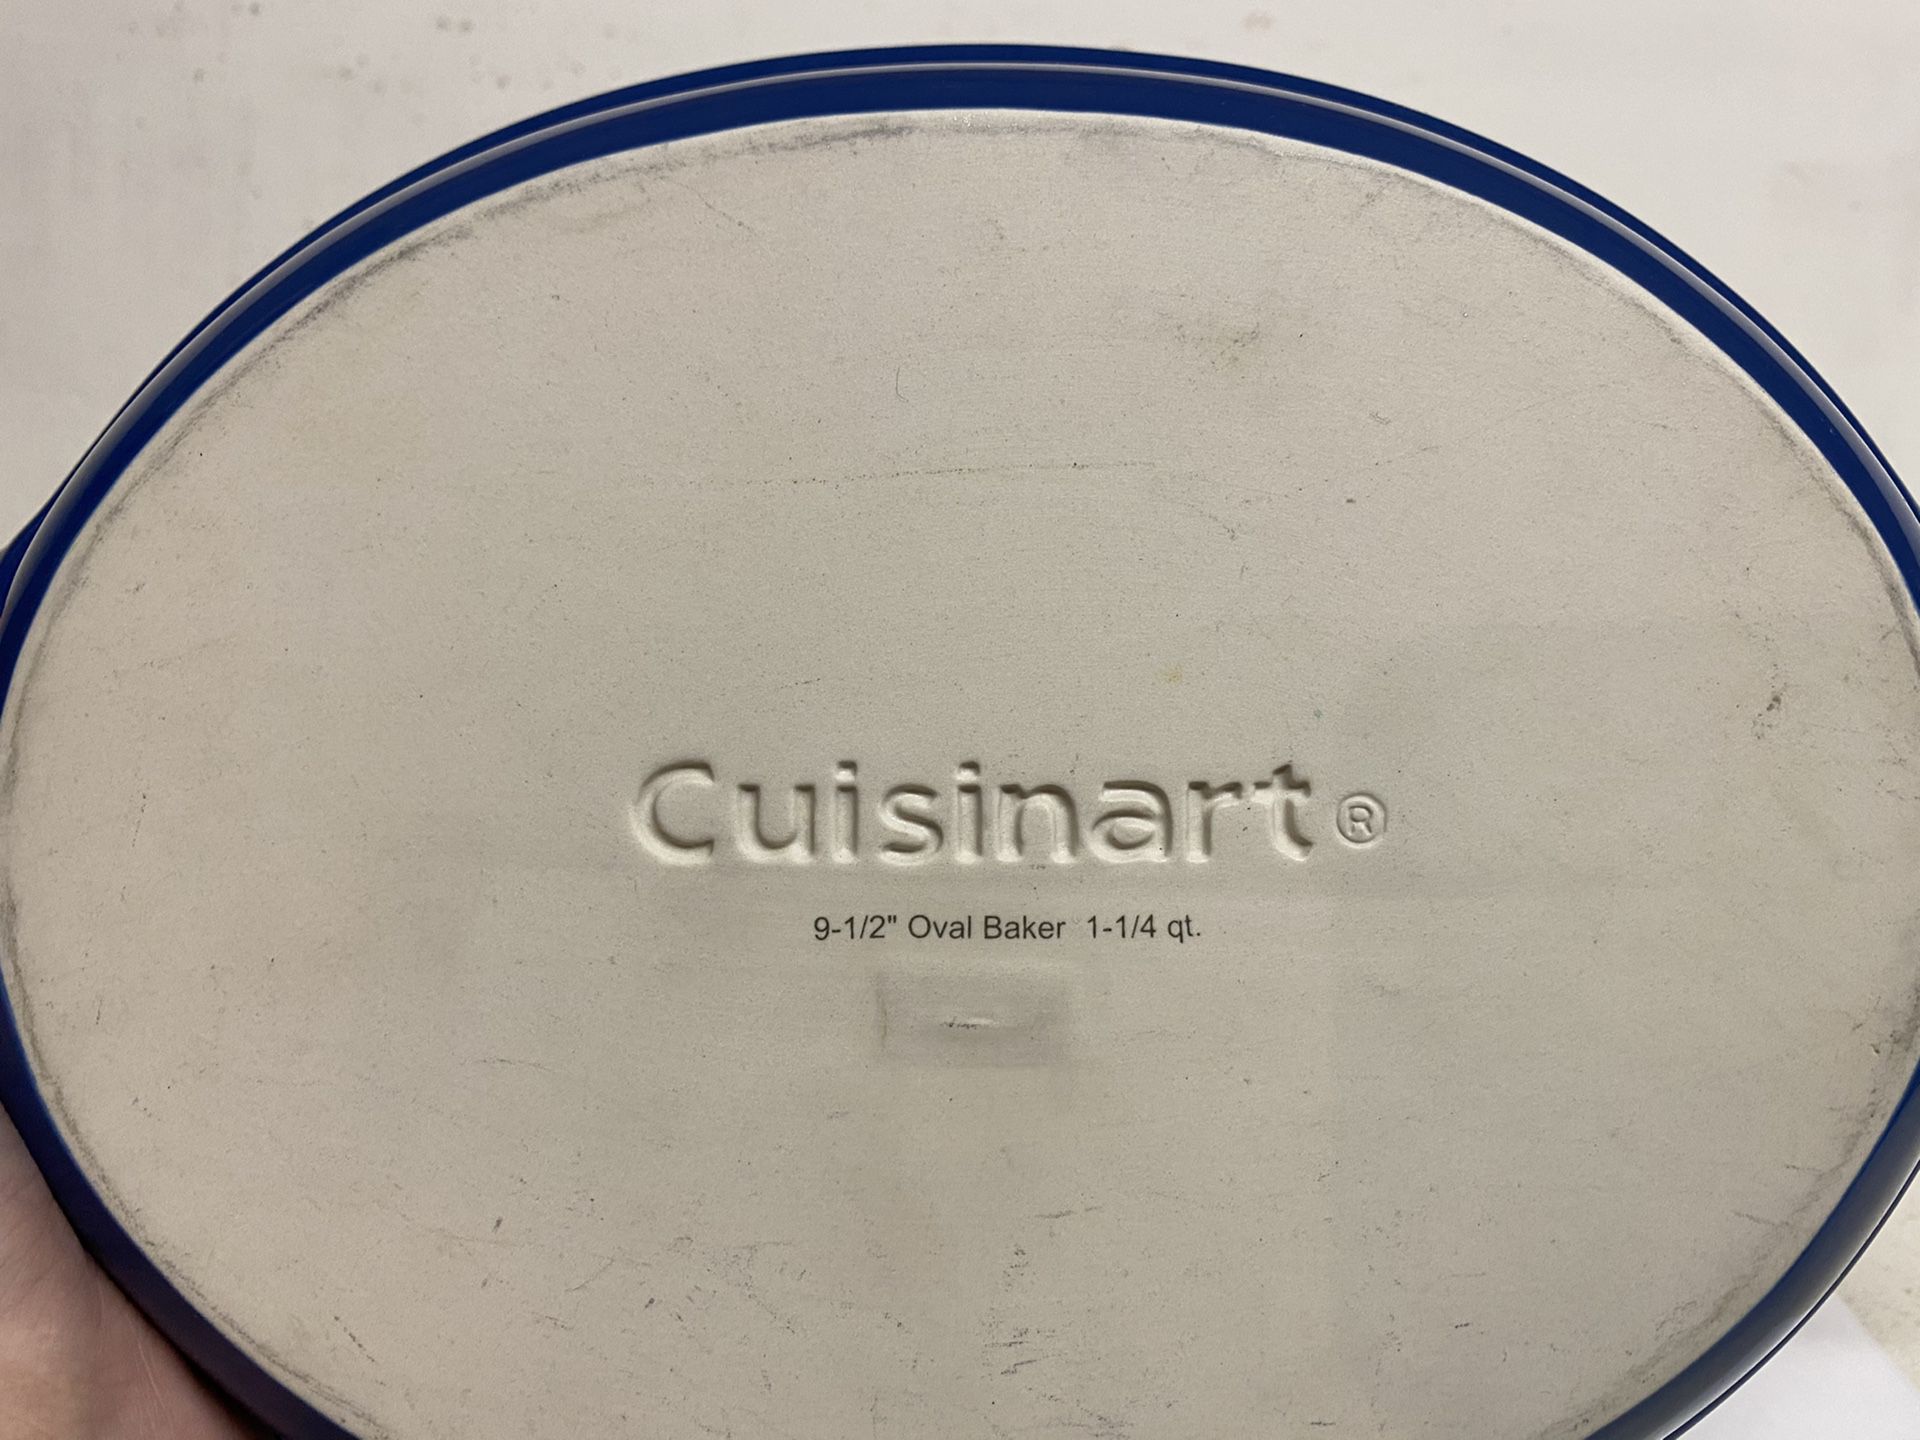 Cuisinart Cooking Baking Oval Pan in Blue